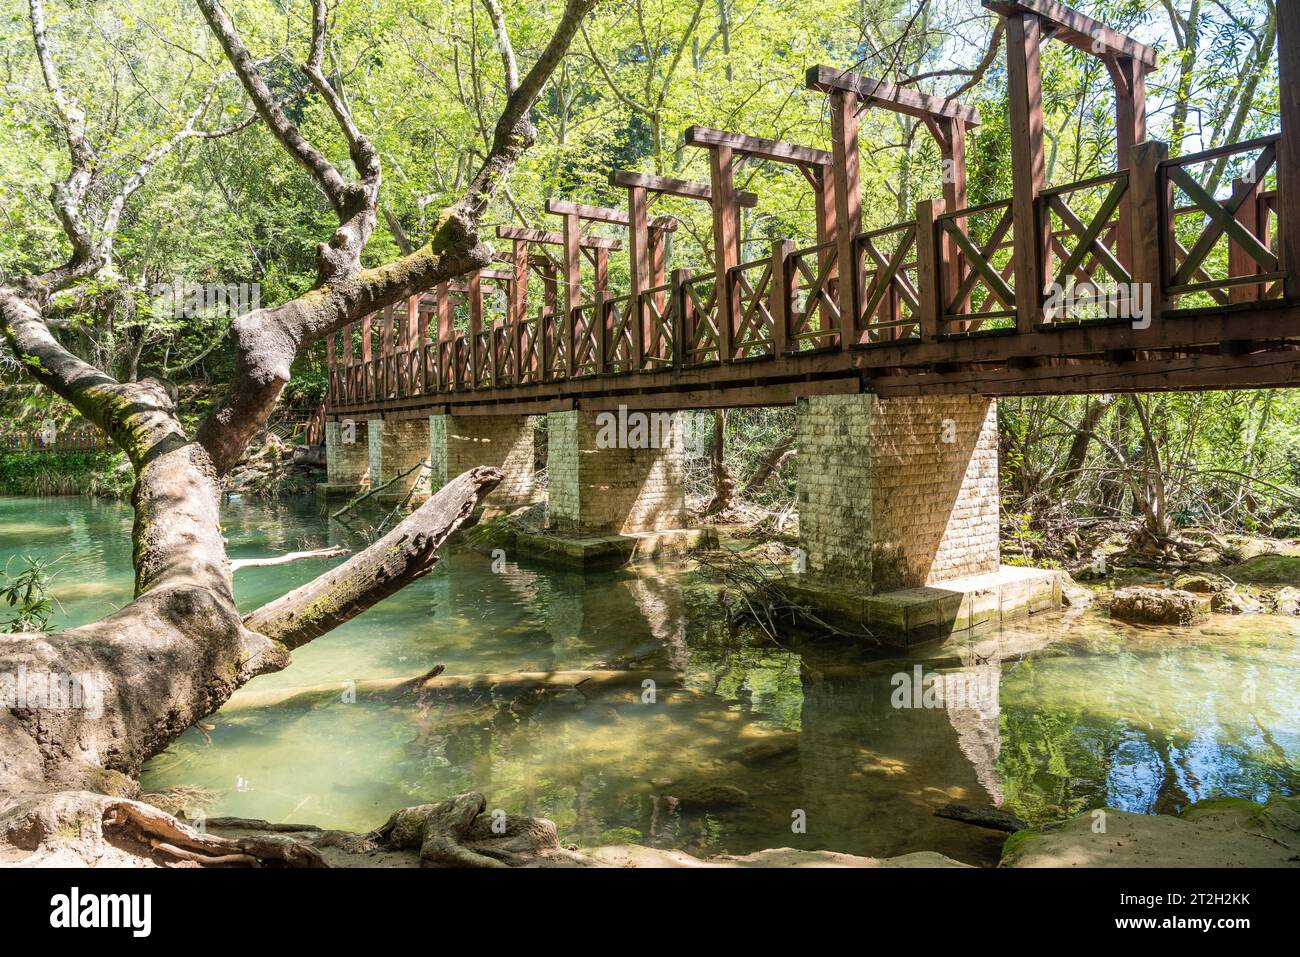 Pedestrian bridge in the forest in Kursunlu waterfall park in Antalya, Turkey. The waterfall is on one of the tributaries of the Aksu River, where the Stock Photo